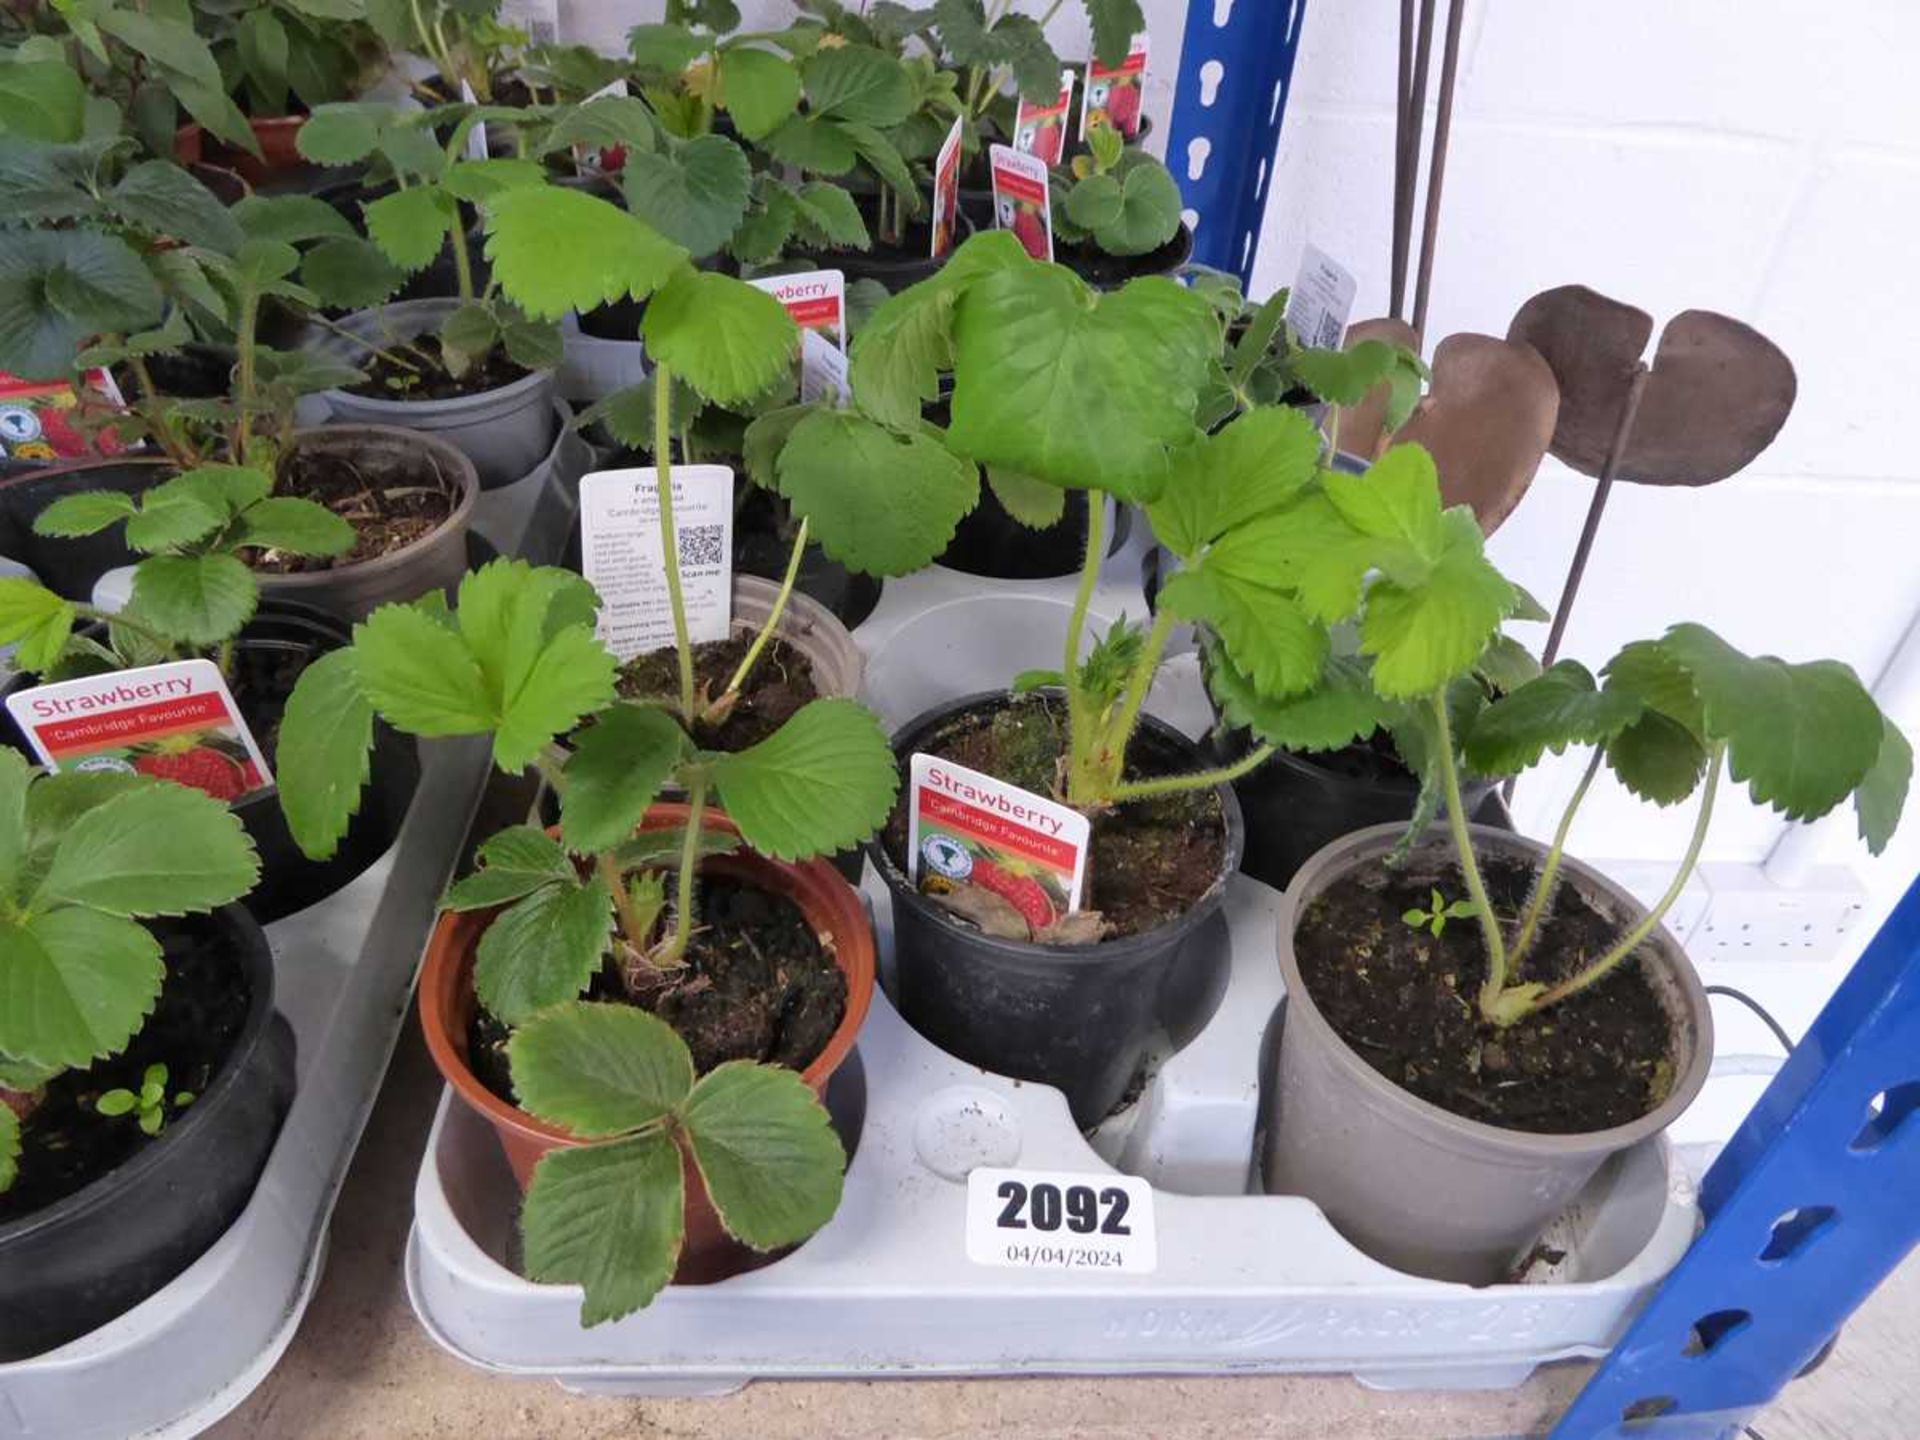 Tray containing 10 pots of Cambridge Favourite strawberry plants